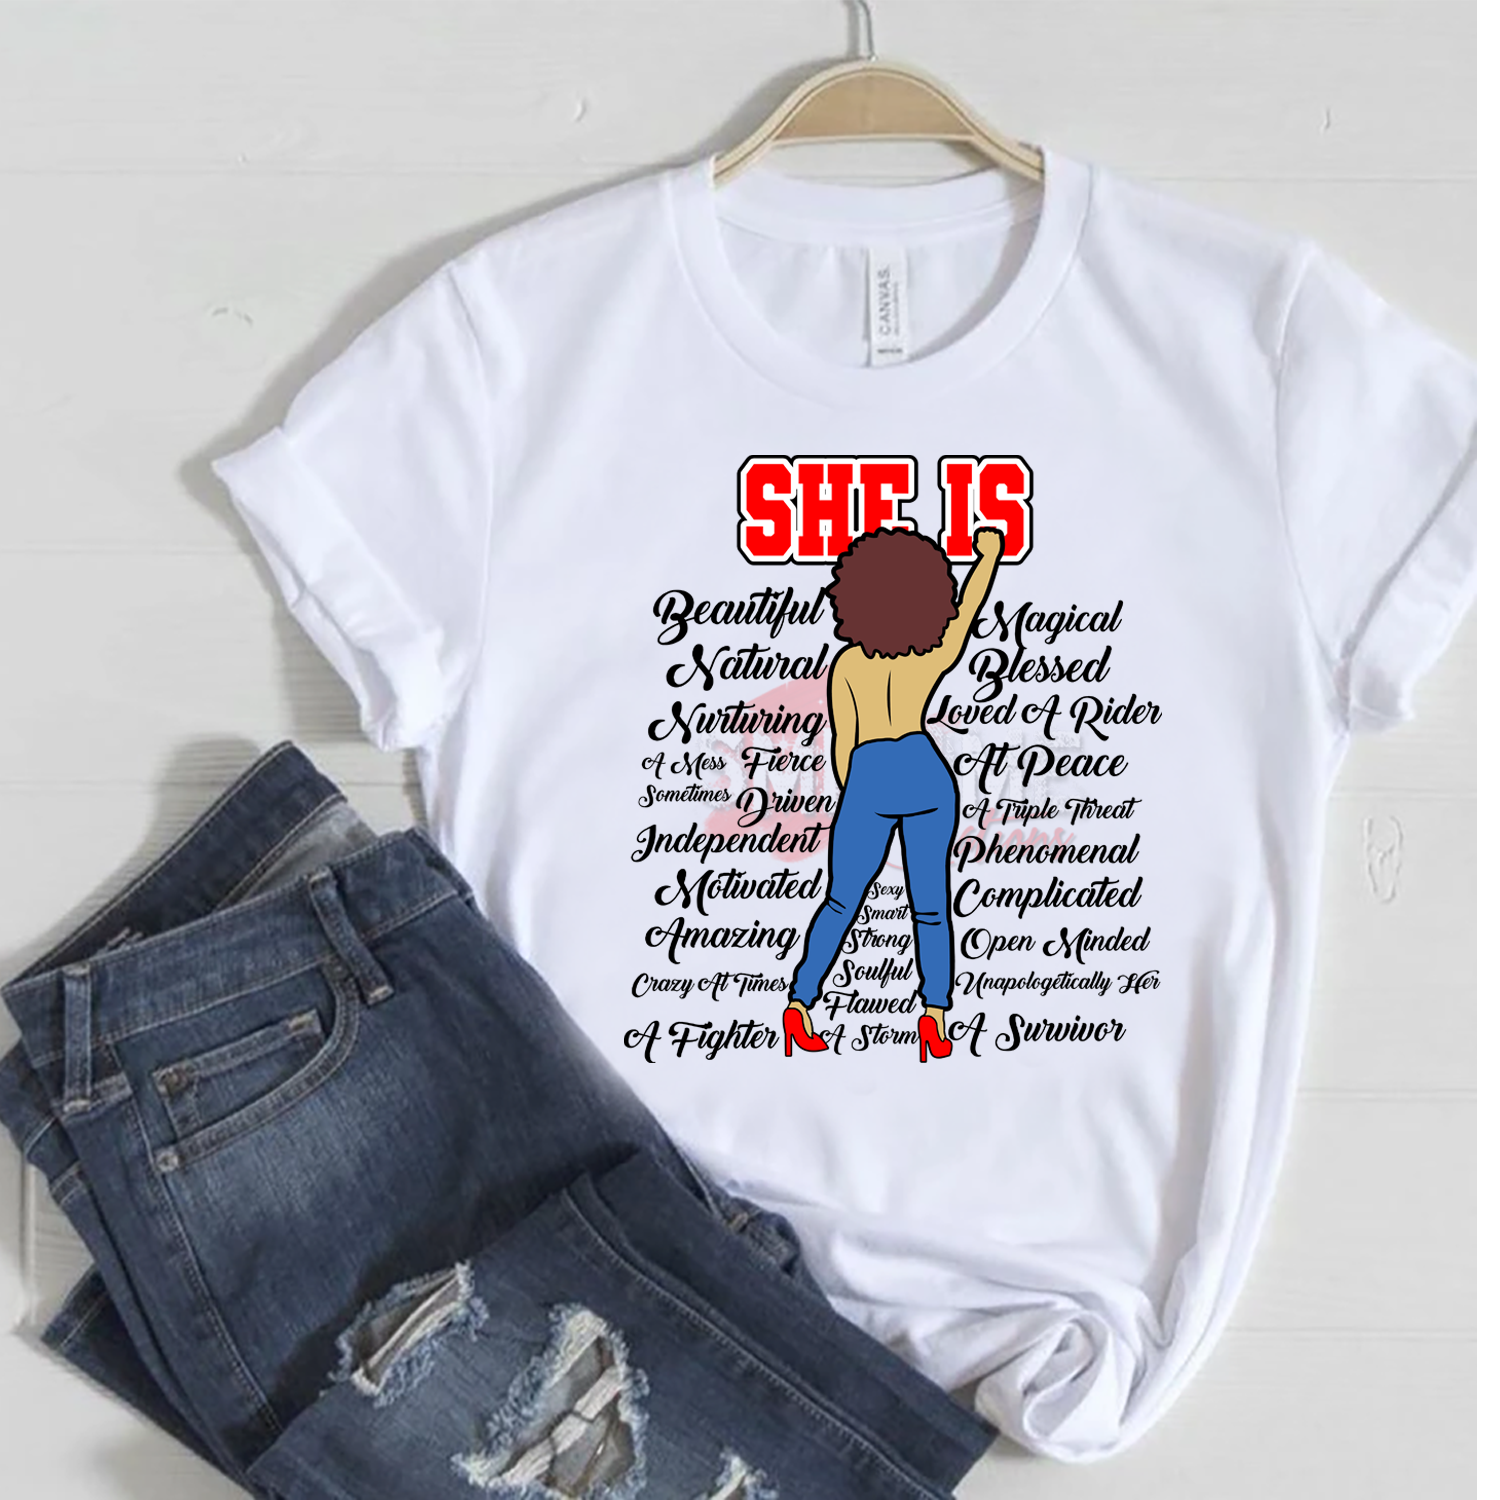 SHE IS T-shirt